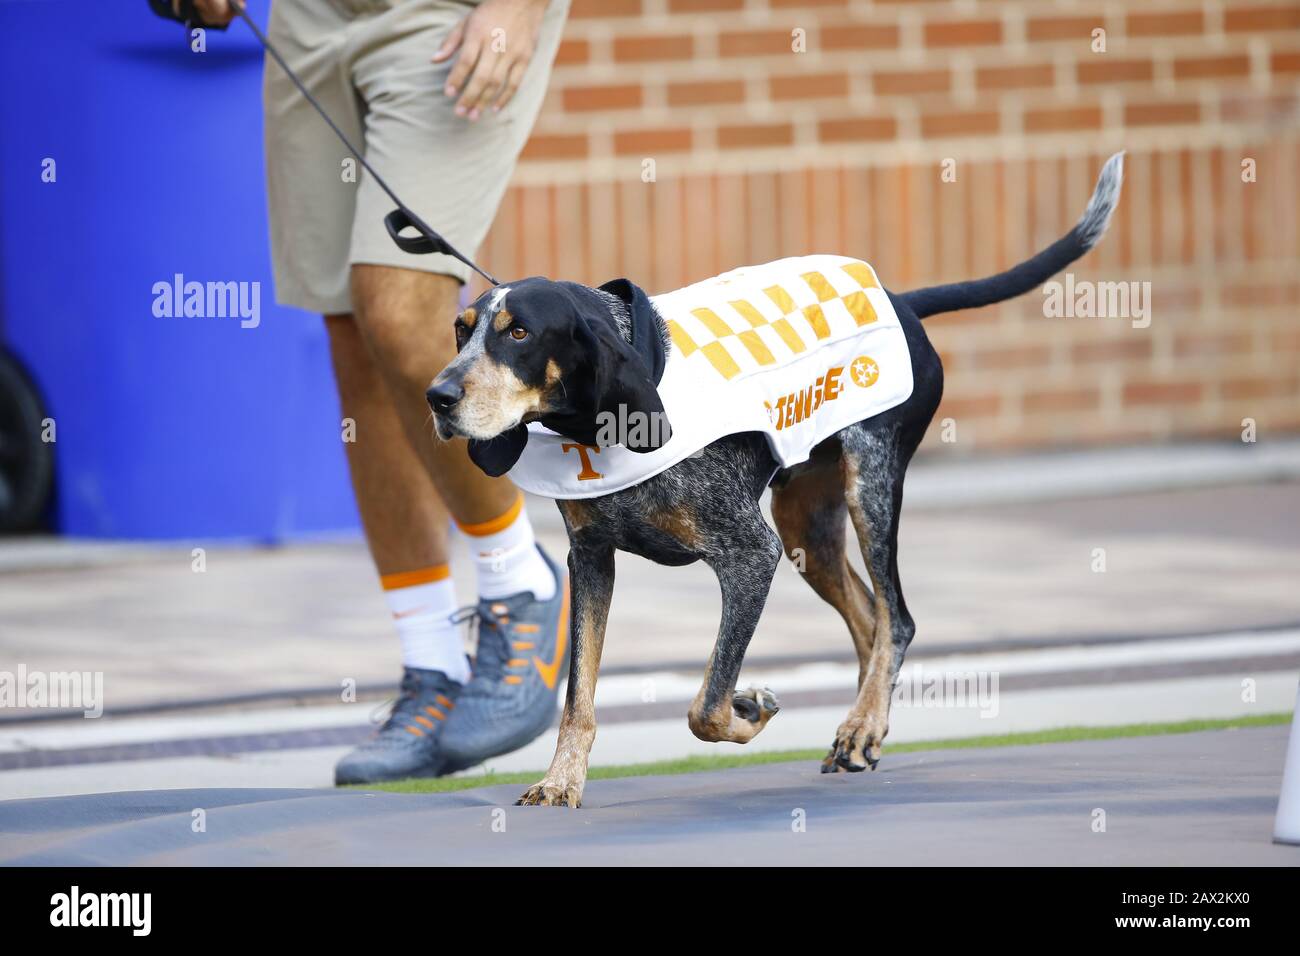 The University of Tennessee Volunteers mascot, Smokey, a bluetick coonhound, during a U.S. college football on September 7, 2019. Stock Photo